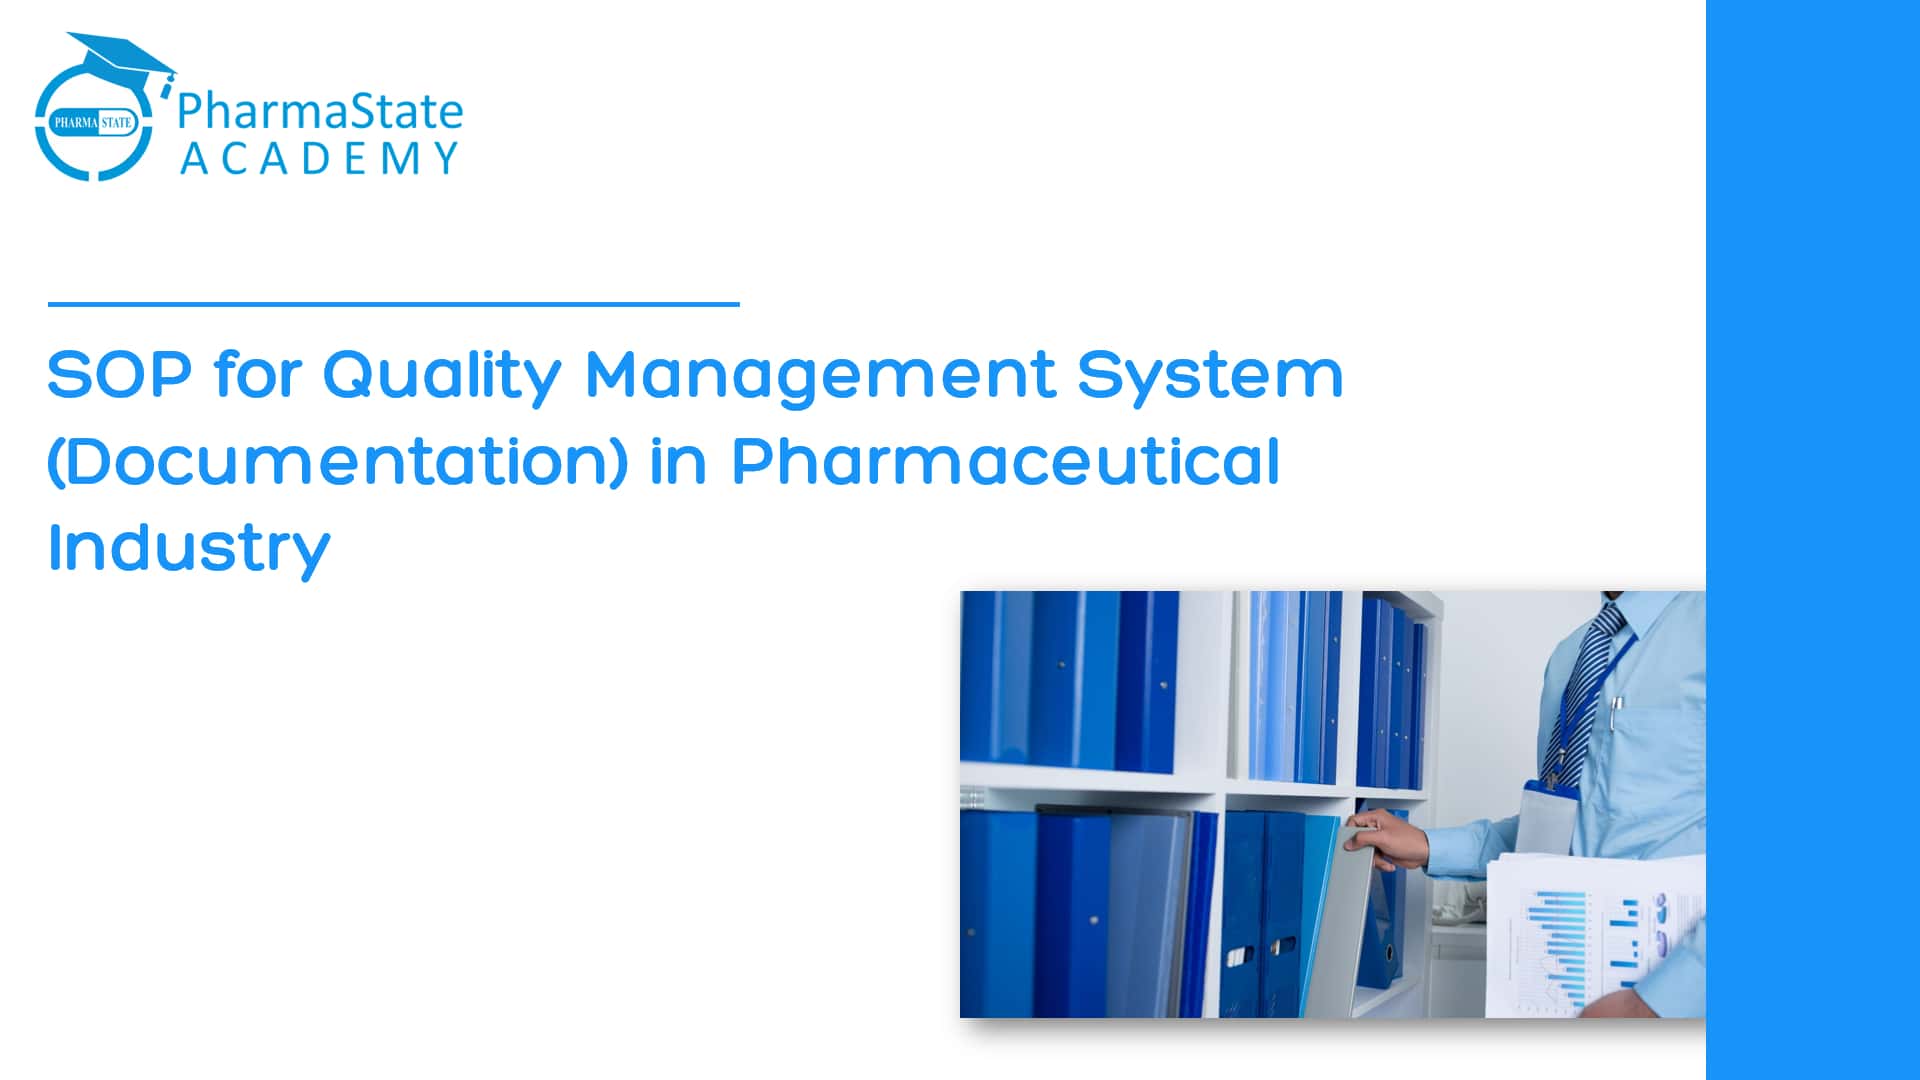 SOP for Quality Management System (Documentation) in Pharmaceutical Industry